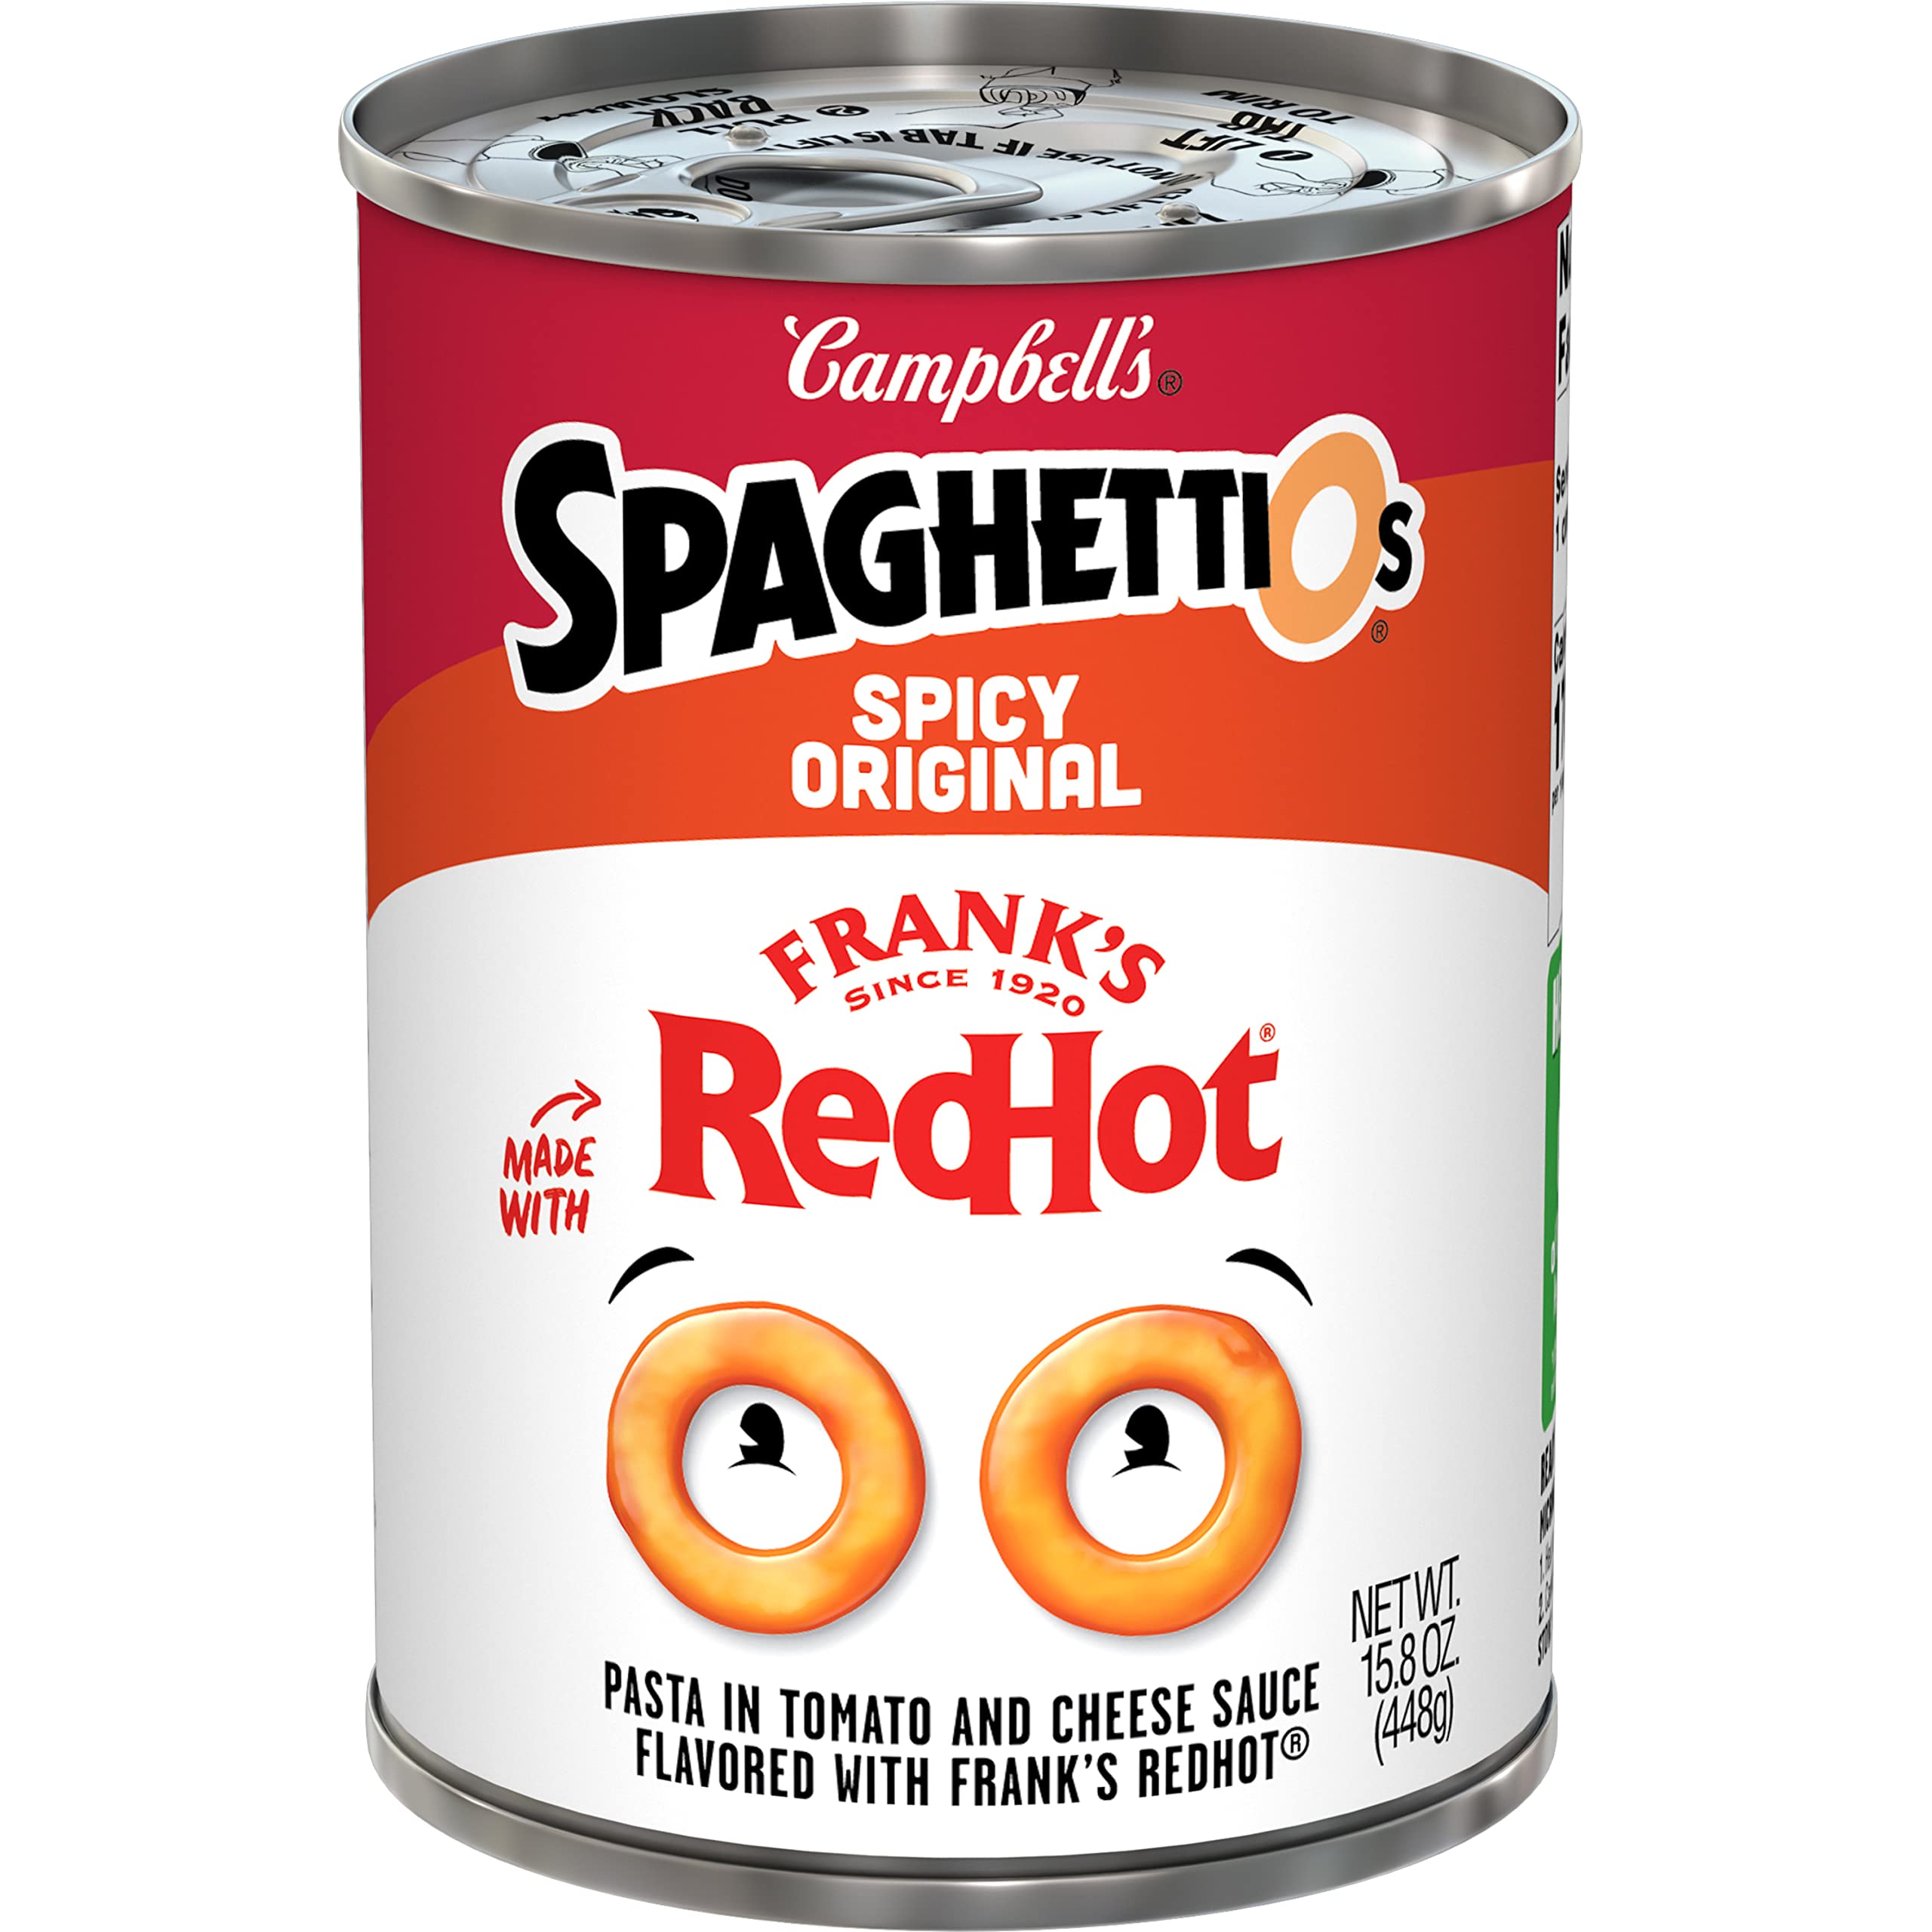 15.8-Oz Campbell's SpaghettiOs Spicy Original w/ Frank's RedHot $0.95 w/ S&S + Free S&H w/ Prime or $35+